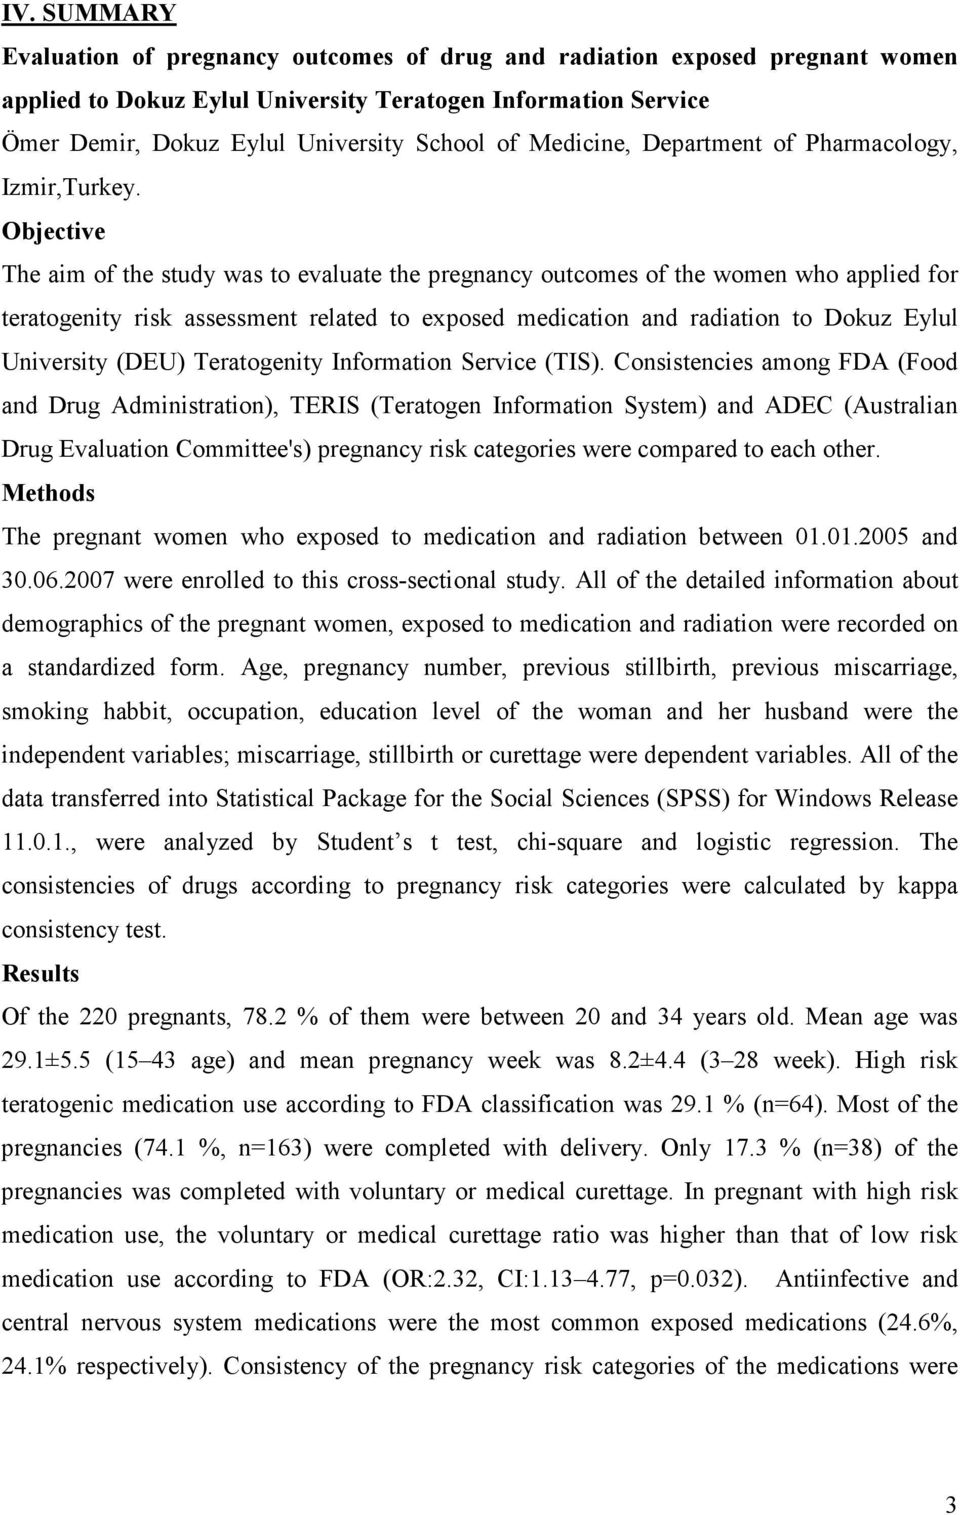 Objective The aim of the study was to evaluate the pregnancy outcomes of the women who applied for teratogenity risk assessment related to exposed medication and radiation to Dokuz Eylul University